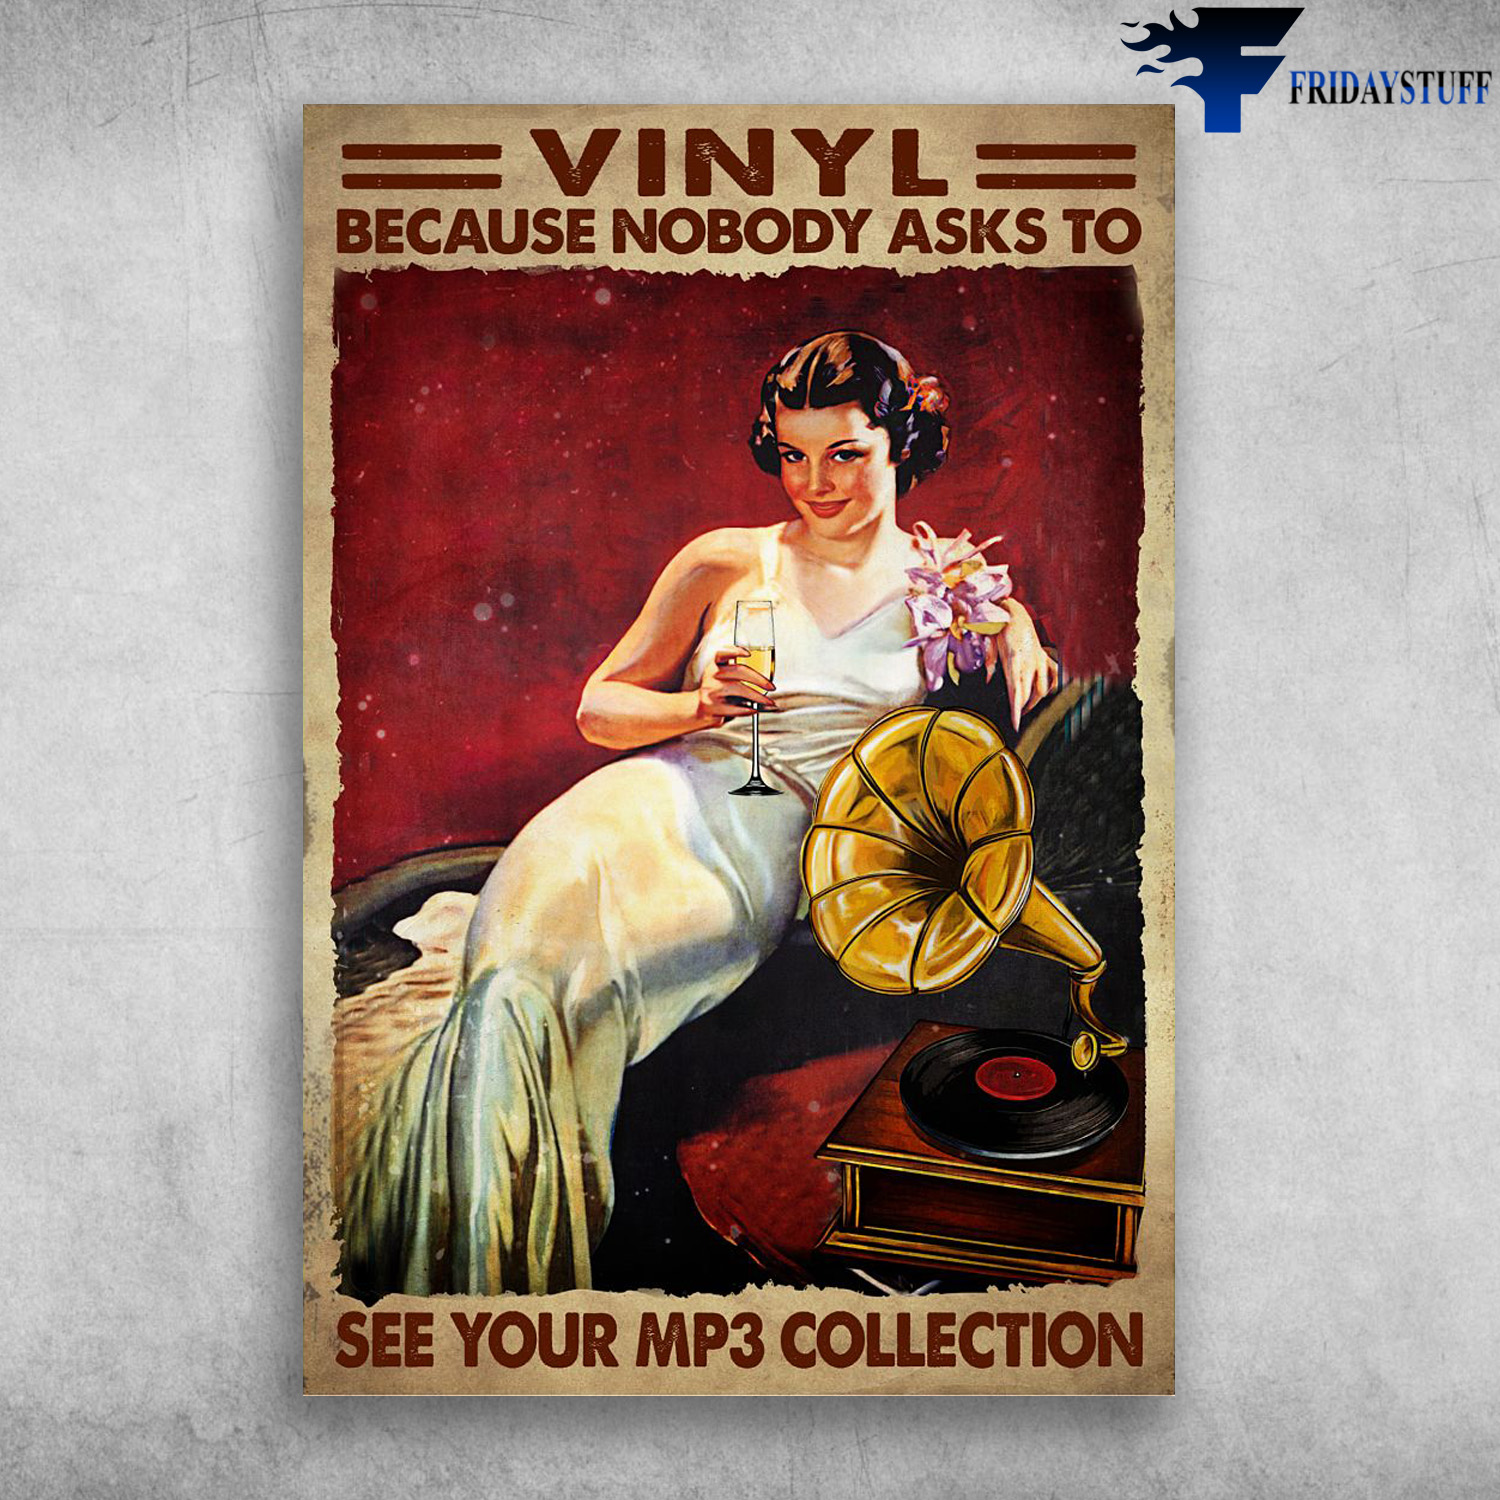 Lady Loves Vinyl And Wine - Vinyl Because Nobody Asks To, See Your MP3 Collectiom